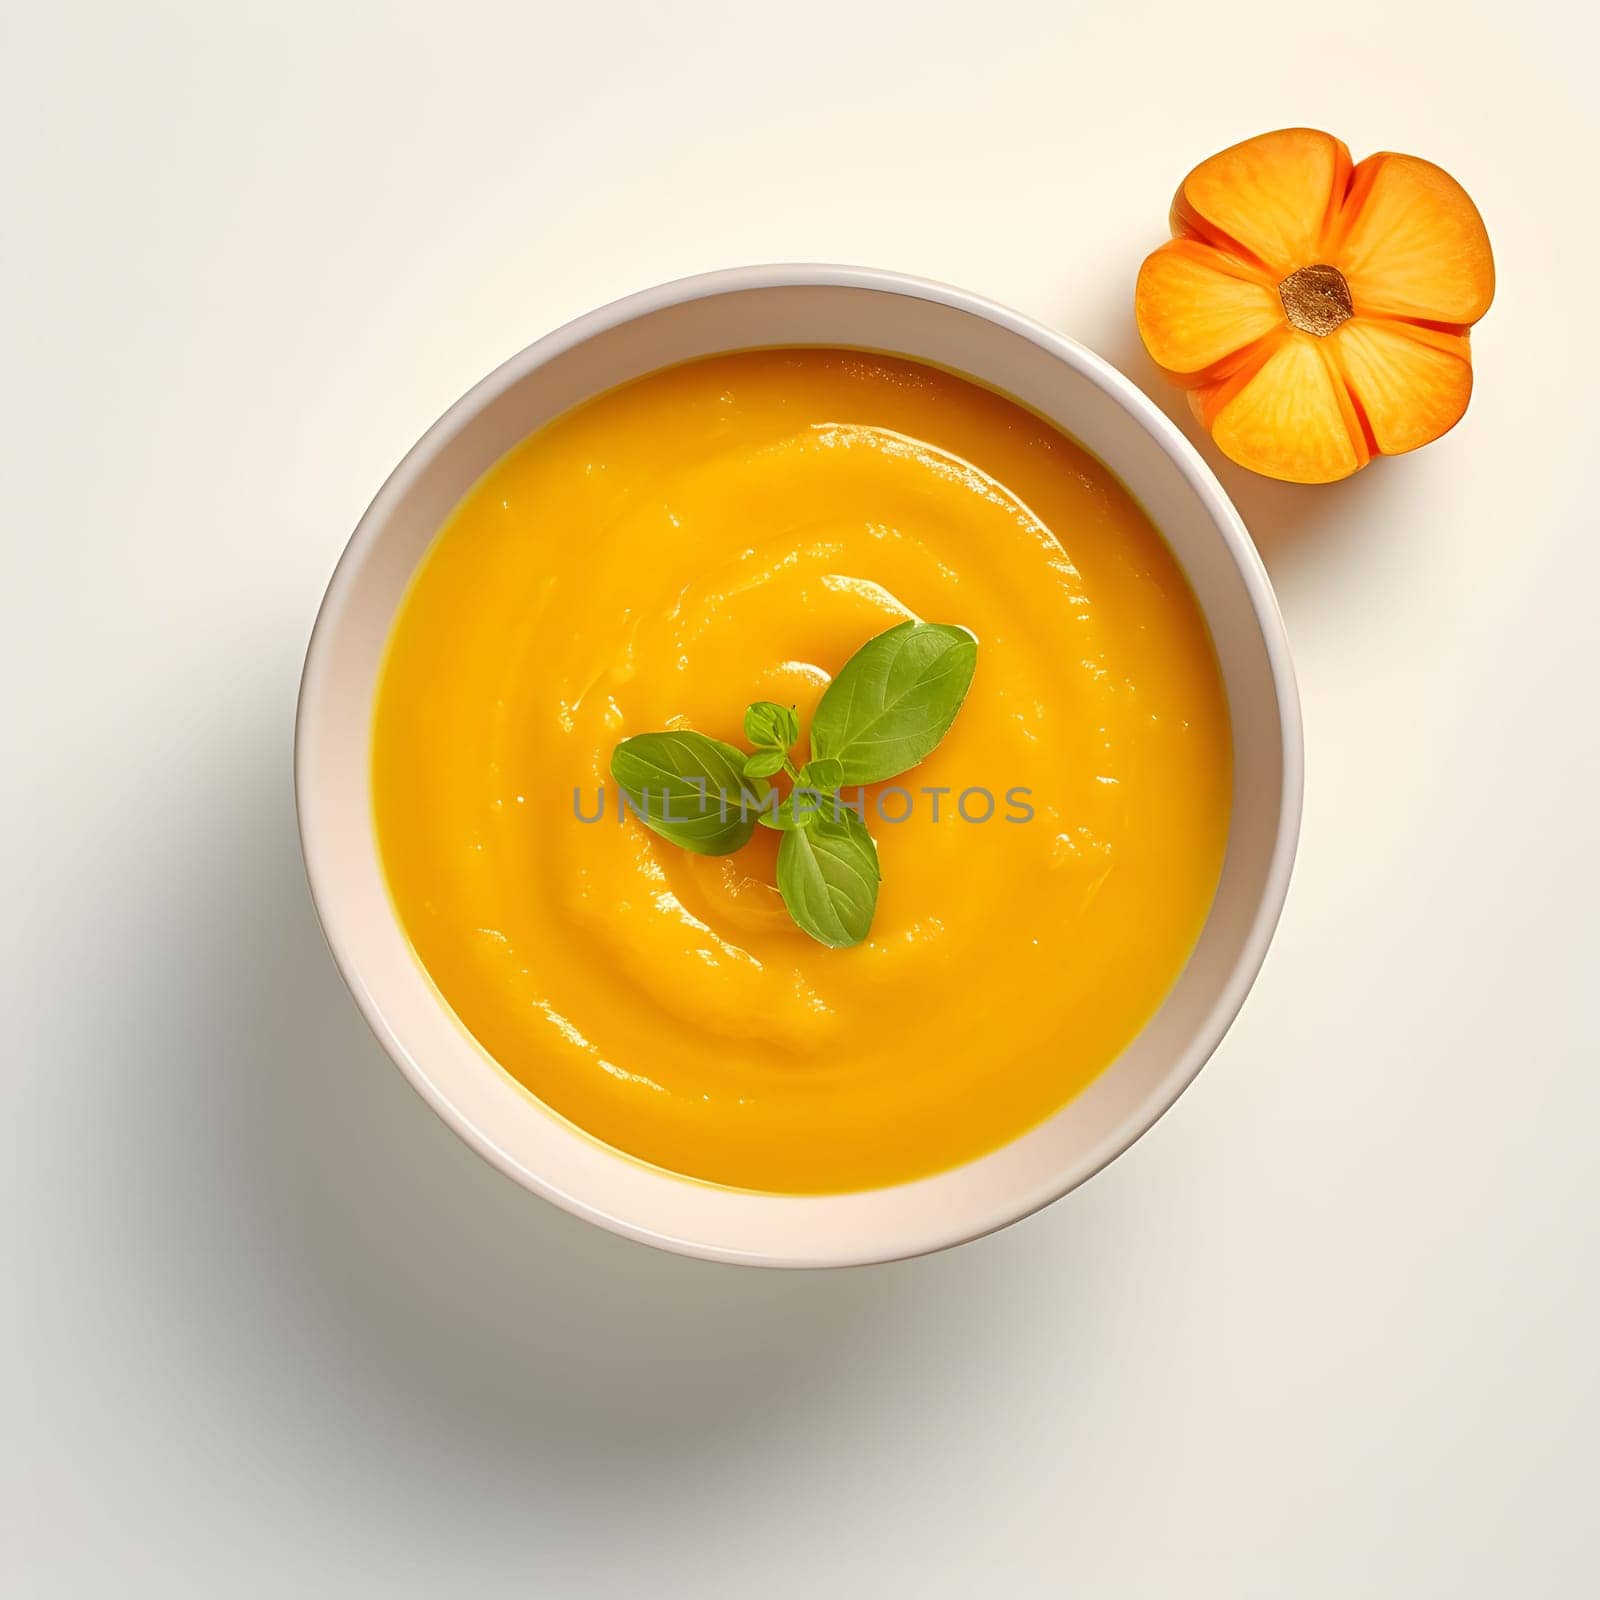 Top view of a bowl with pumpkin soup and basil leaves. Pumpkin as a dish of thanksgiving for the harvest, picture on a white isolated background. Atmosphere of joy and celebration.